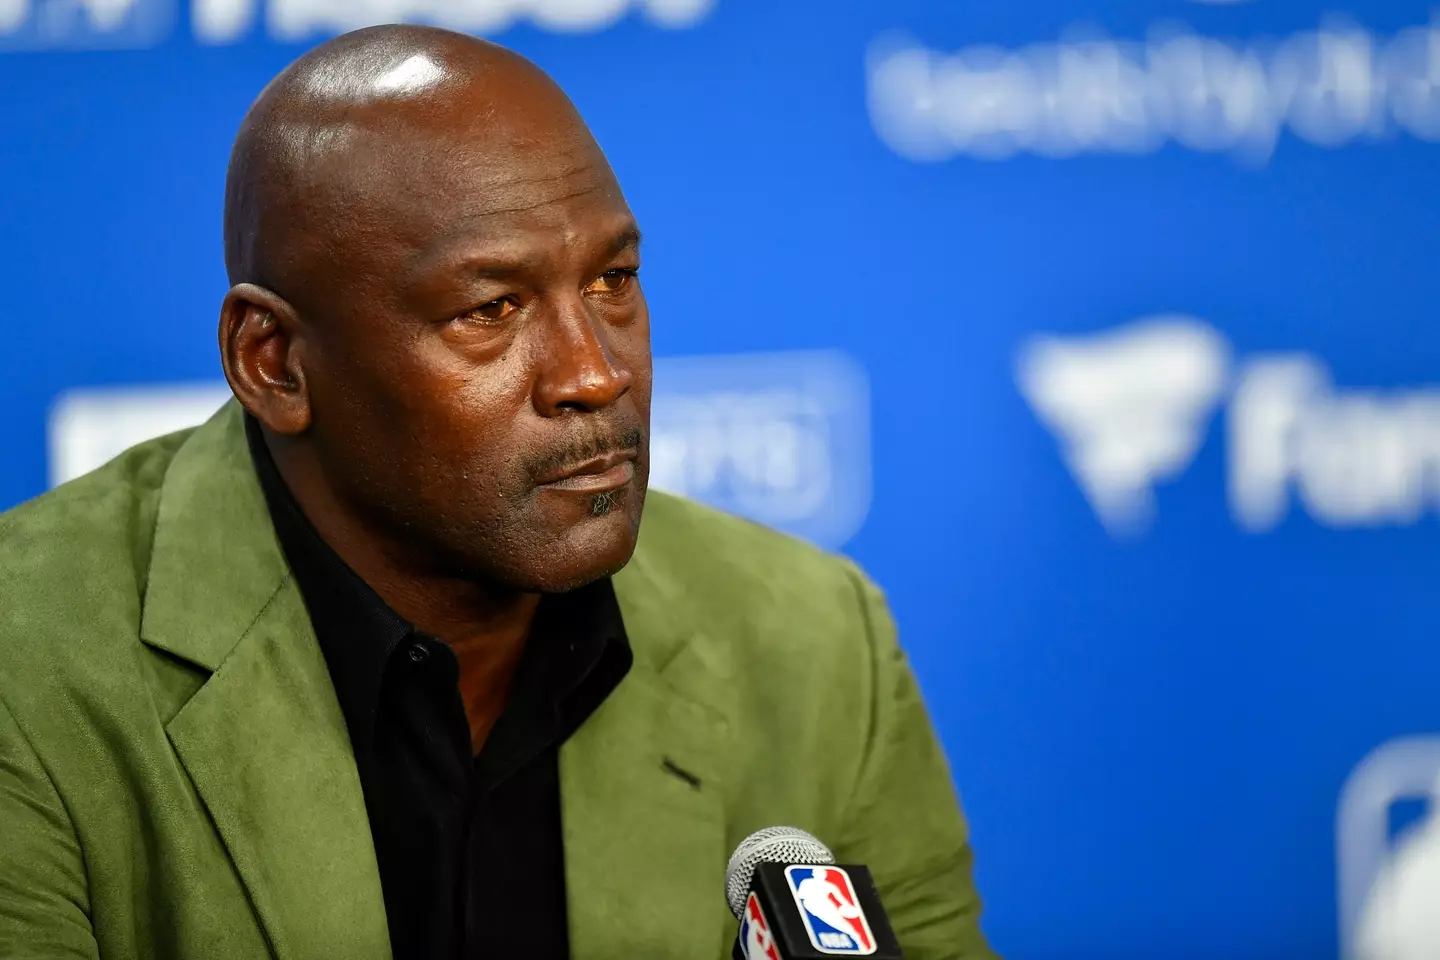 Michael Jordan doesn't approve of their relationship.